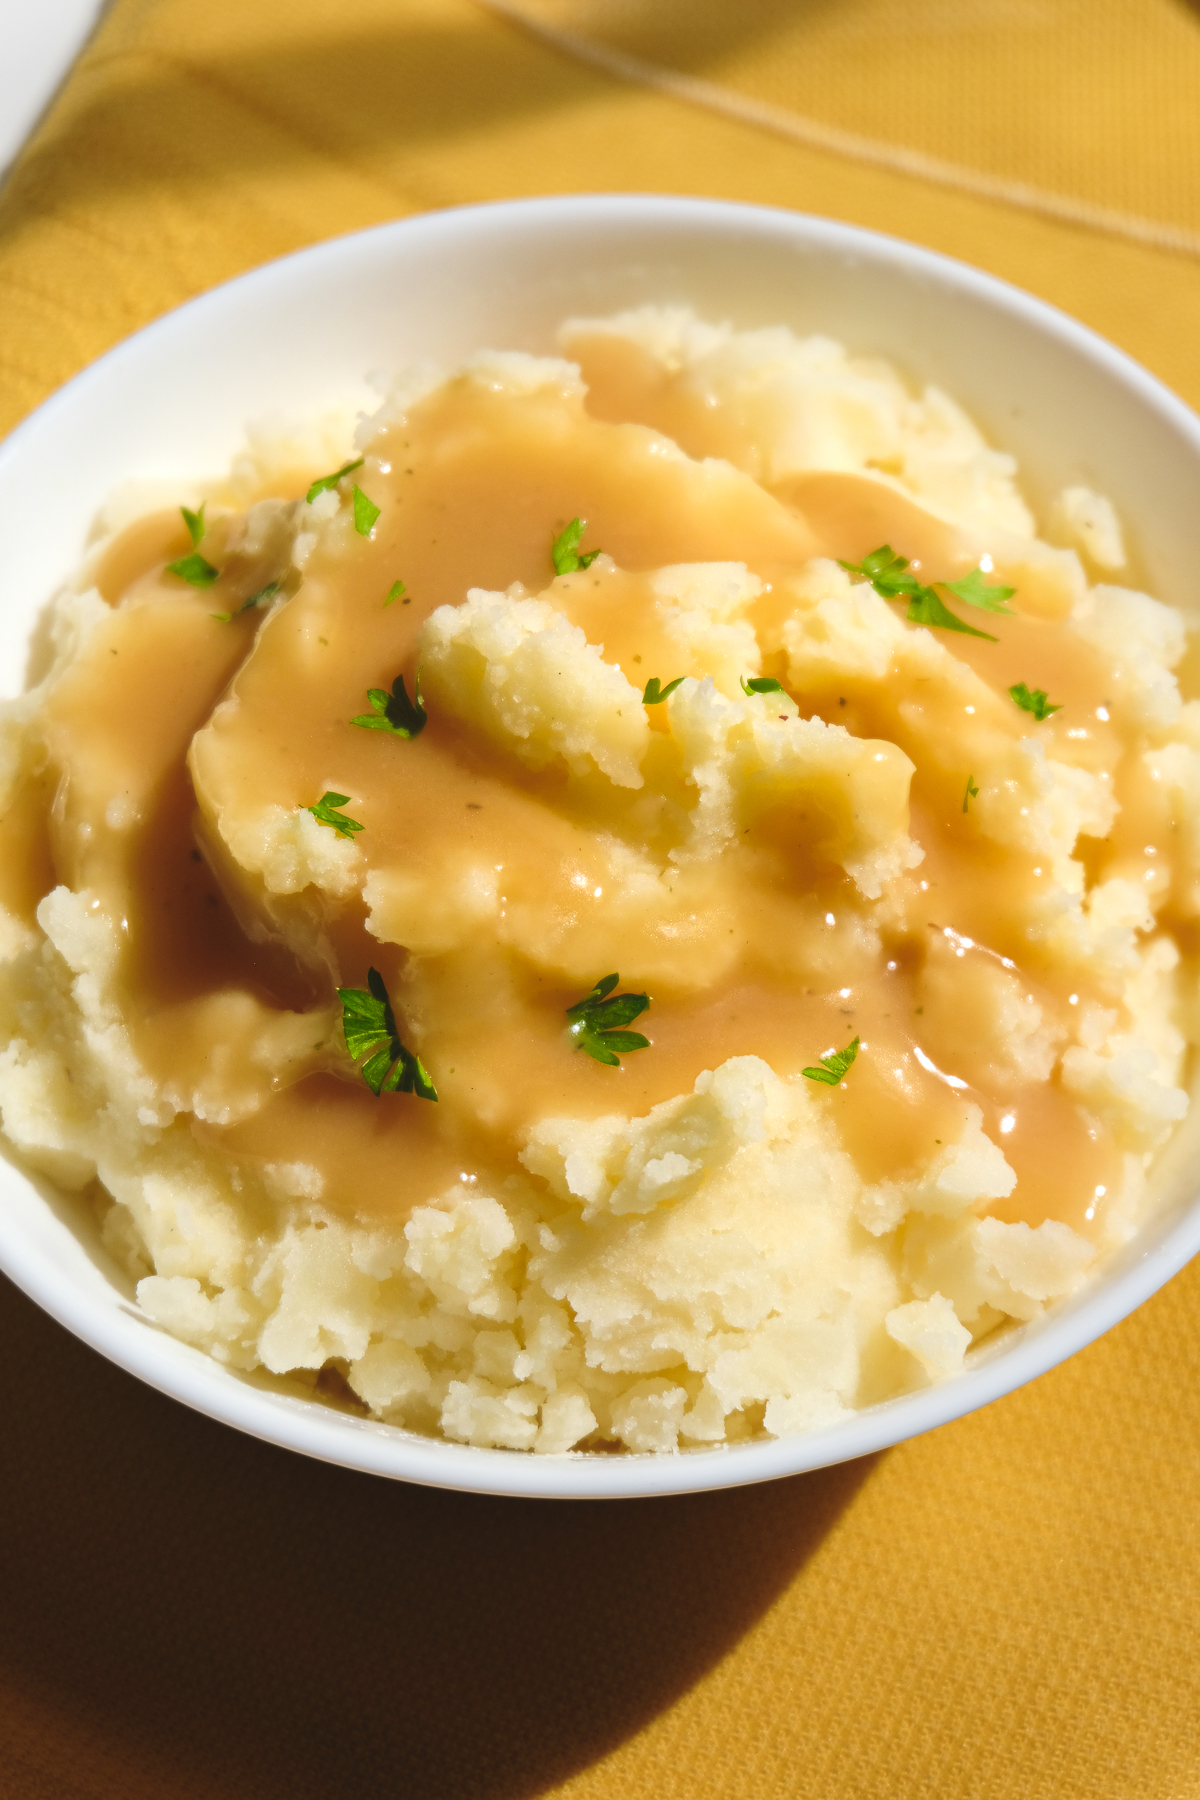 Vegan gravy poured over mashed potatoes in a bowl on a yellow tablecloth.